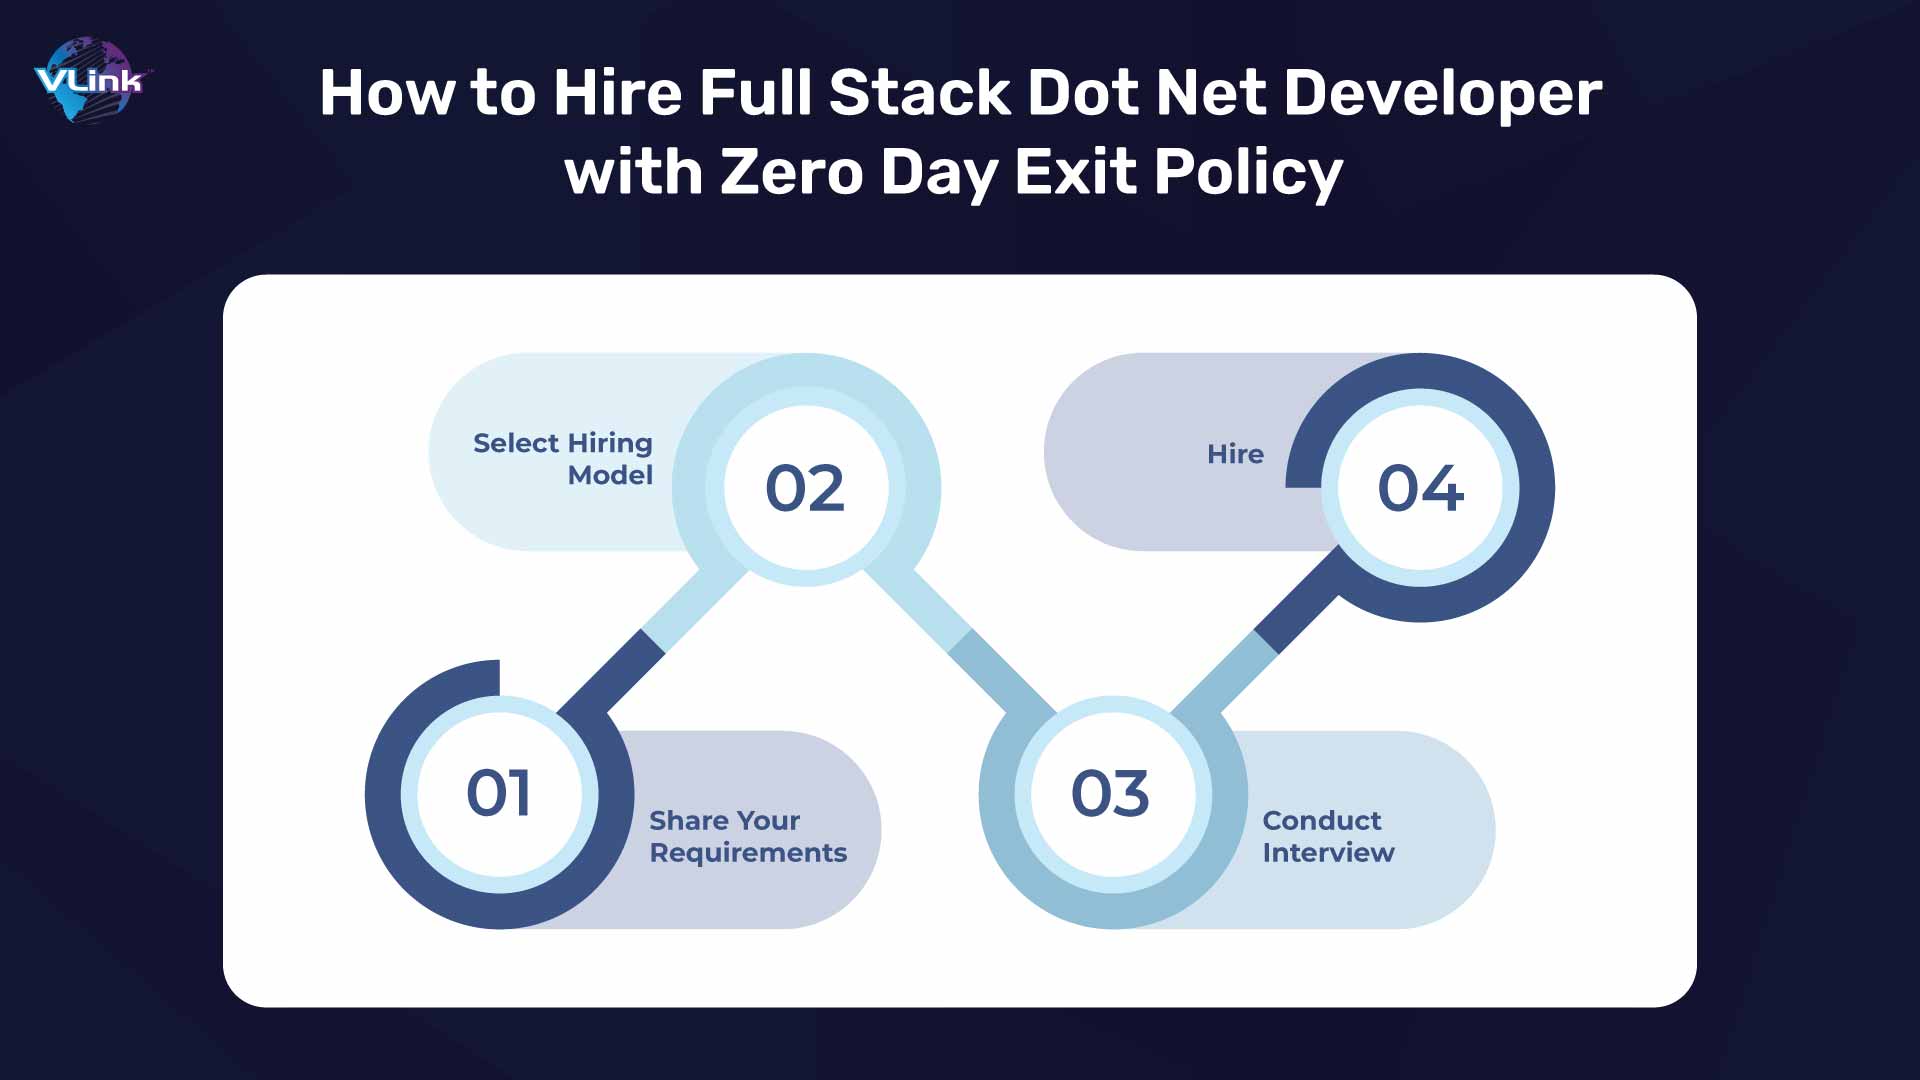 How to Hire Full Stack Dot Net Developer with Zero Day Exit Policy